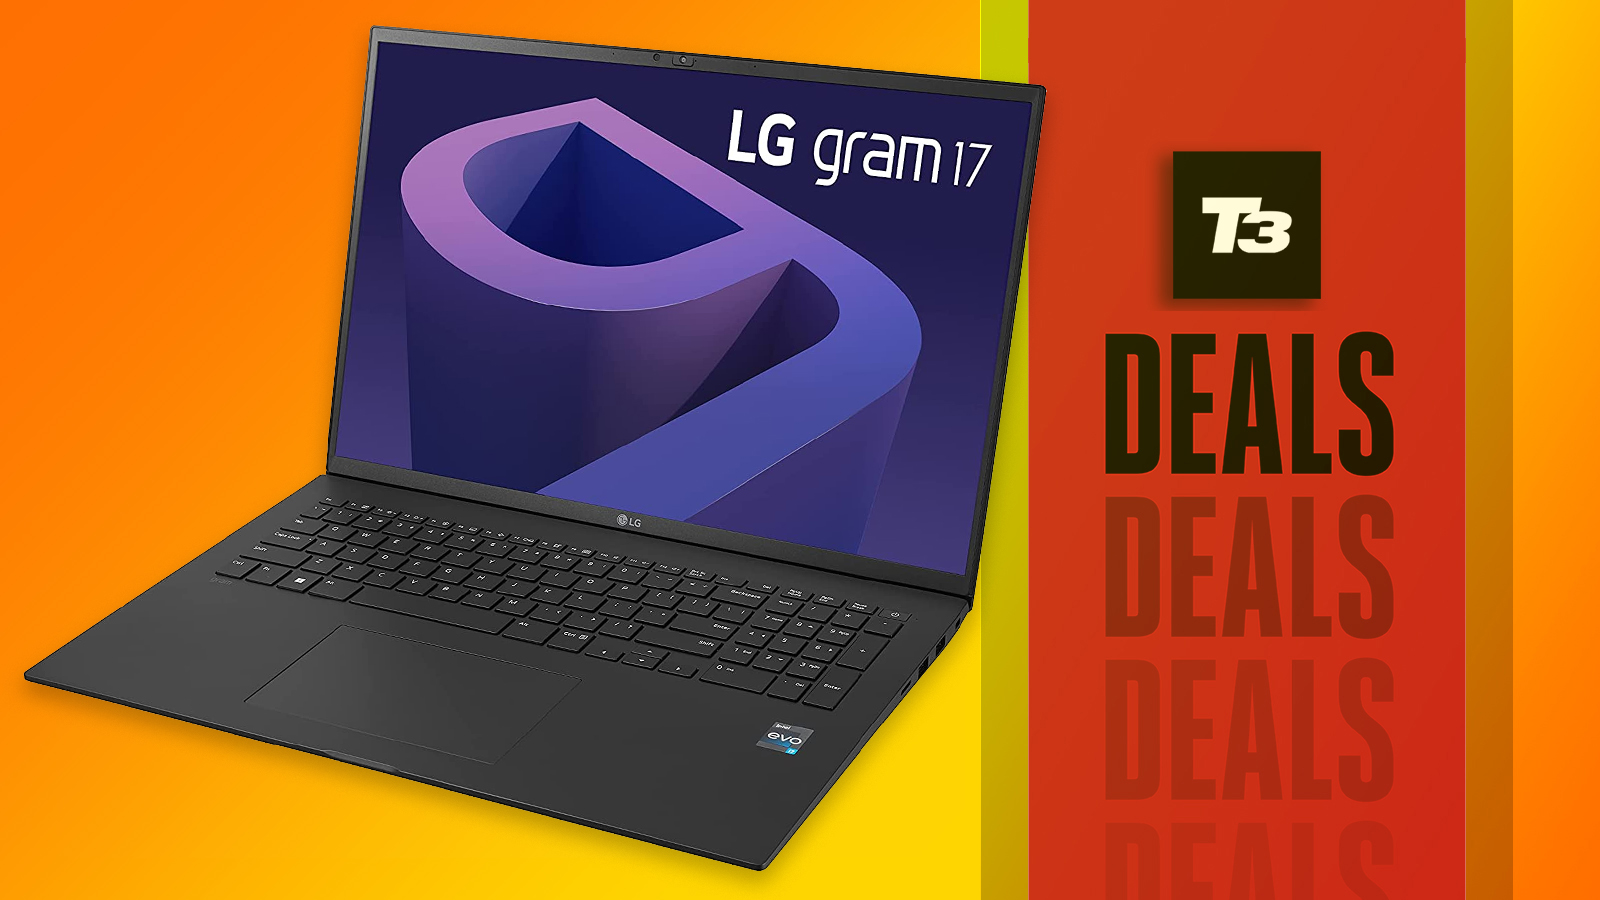 17-inch LG Gram laptop falls to lowest-ever price in Cyber Monday